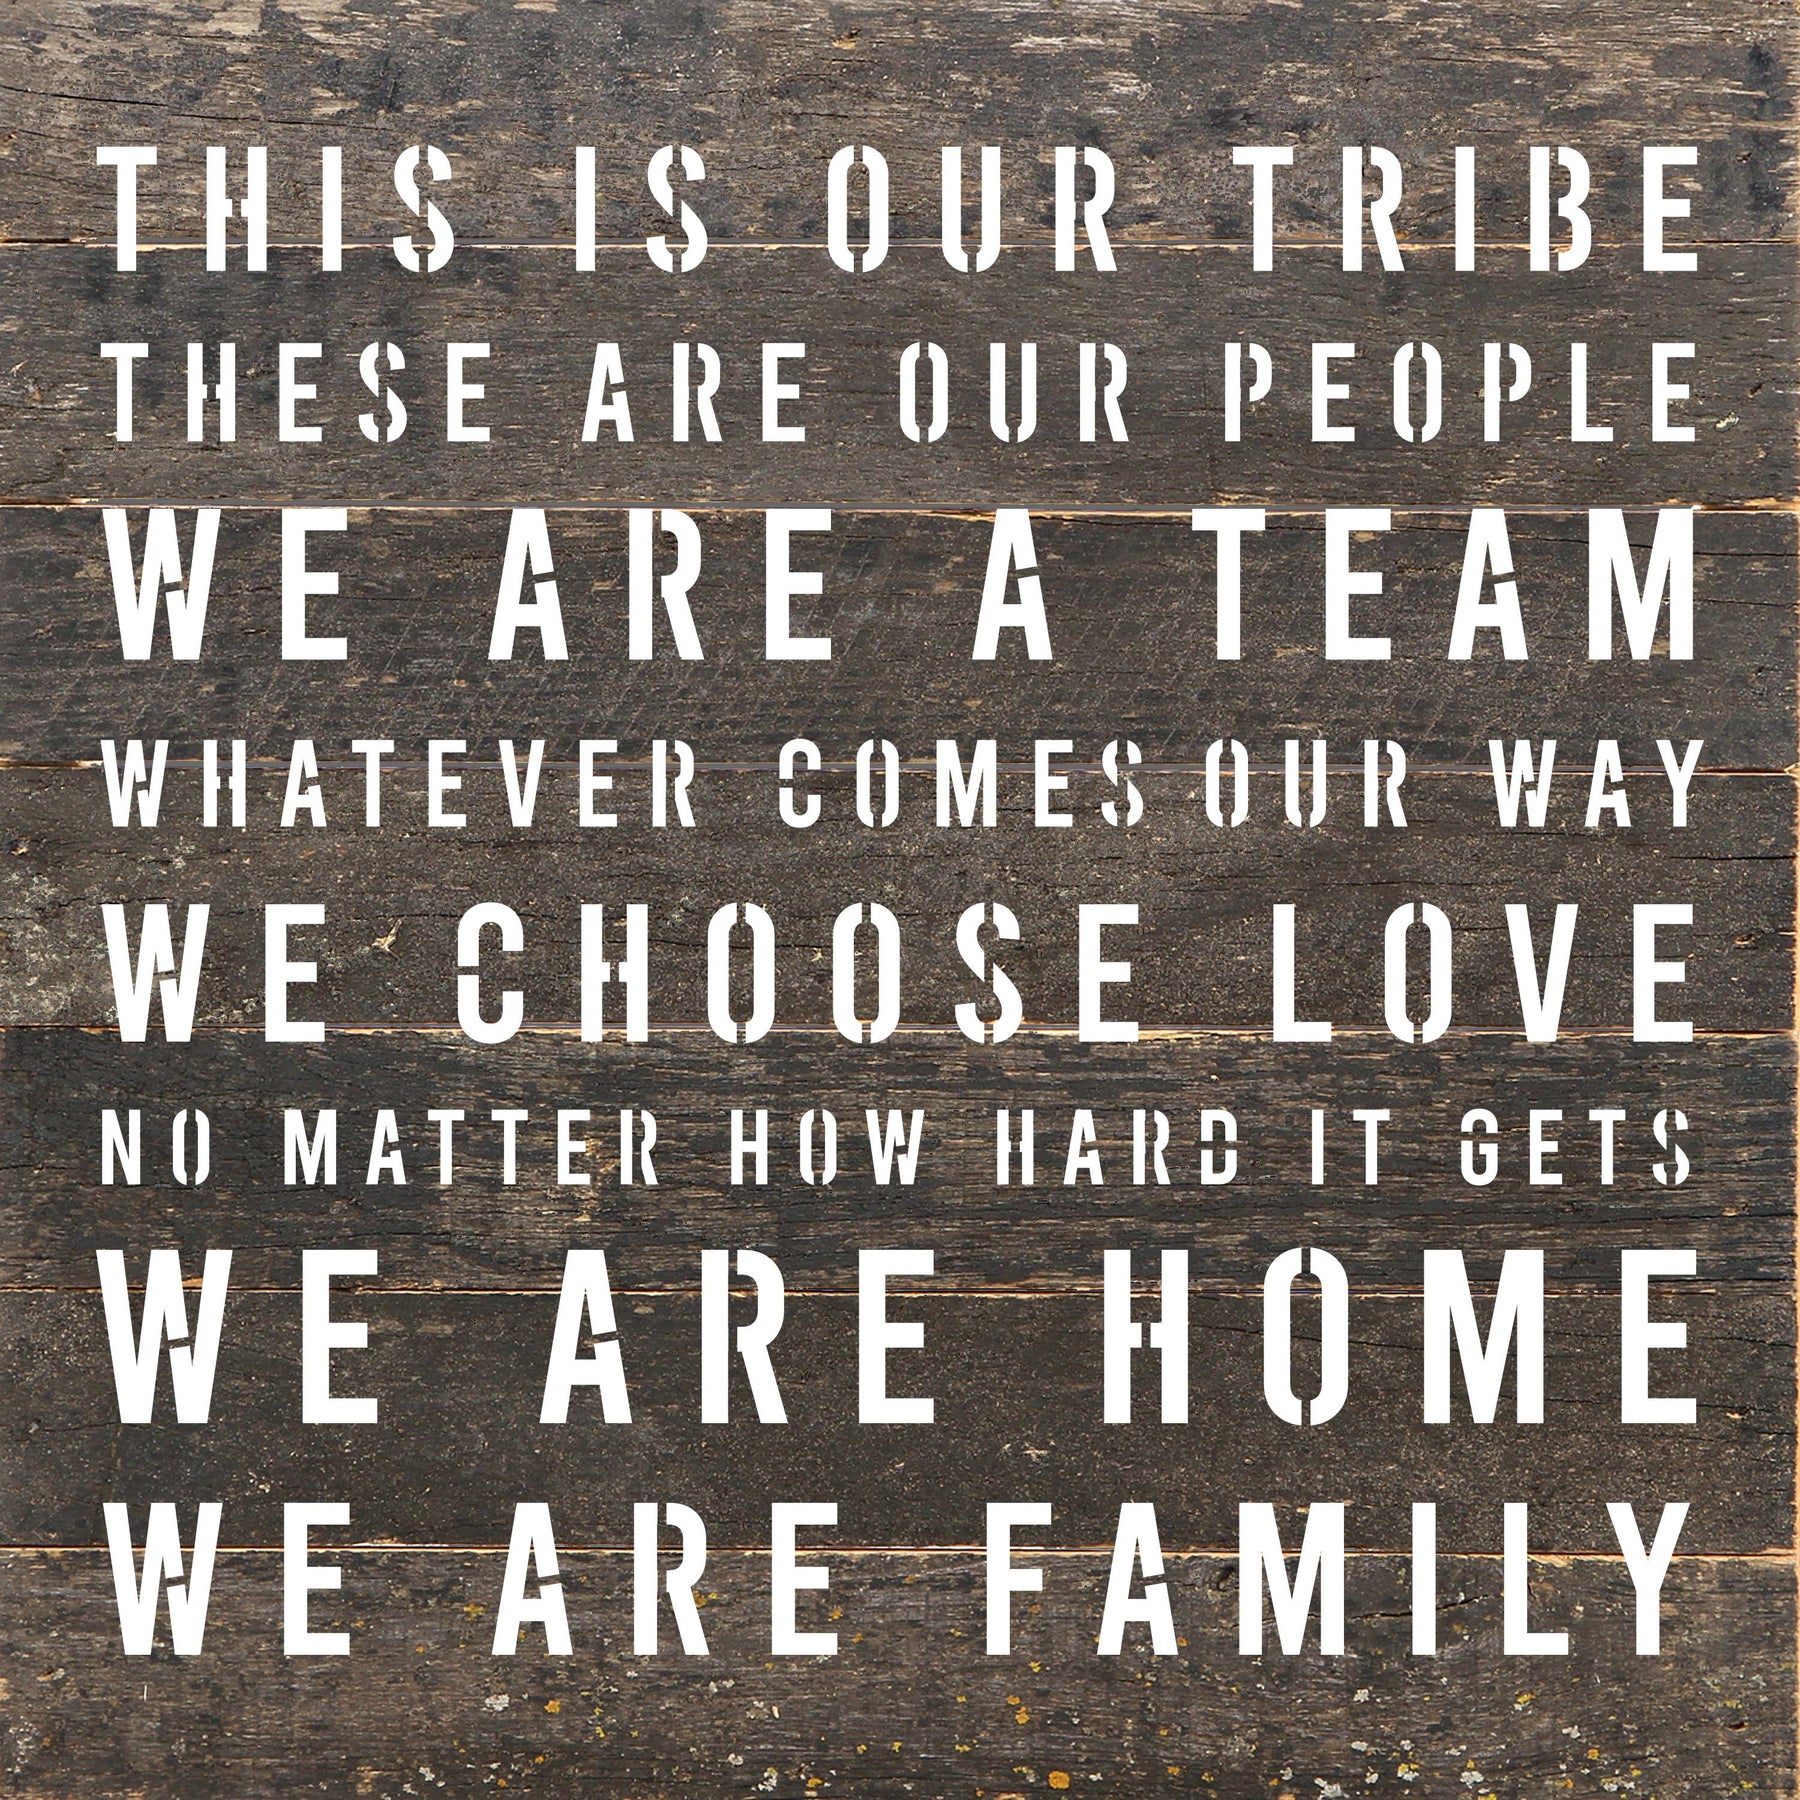 This is our tribe. These are our people. We are a Team. Whatever Comes our Way... / 10"X10" Reclaimed Wood Sign